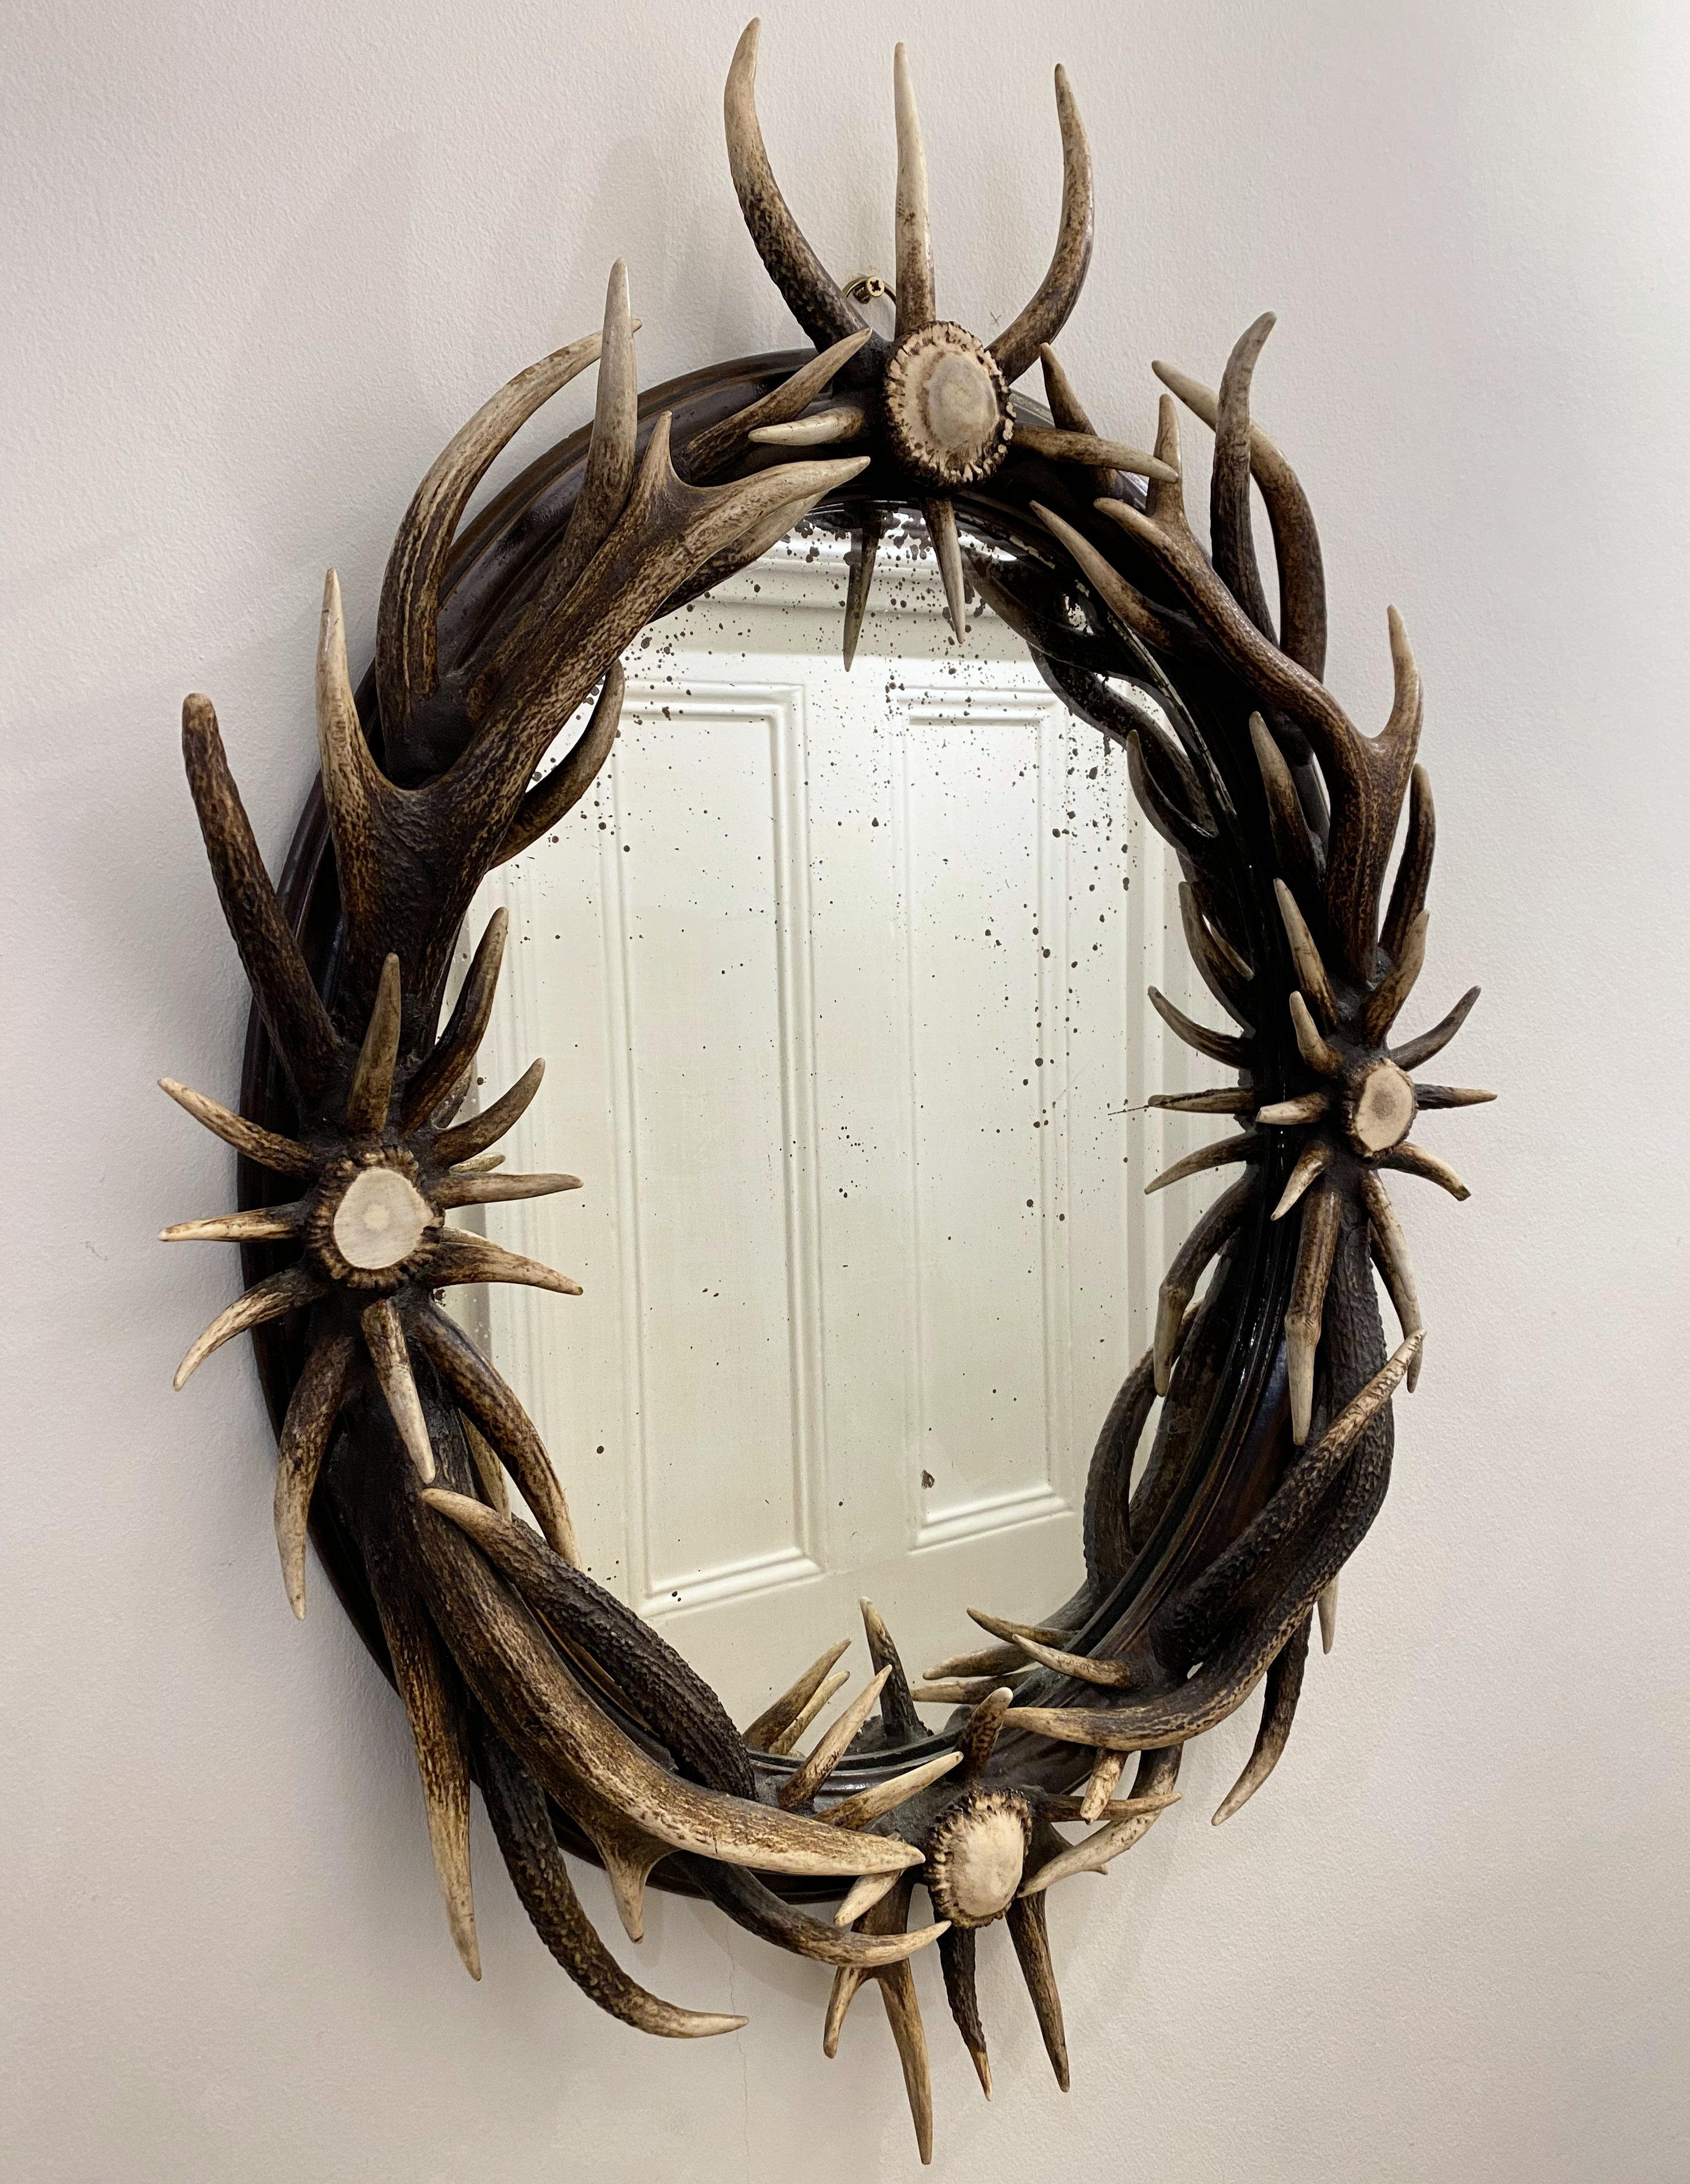 This stunning and original design oval wall mirror is comprised of naturally shed large red deer from Scotland. The individual natural beauty of the antler horn combined with the functionality and artistic design of the wall mirror makes this